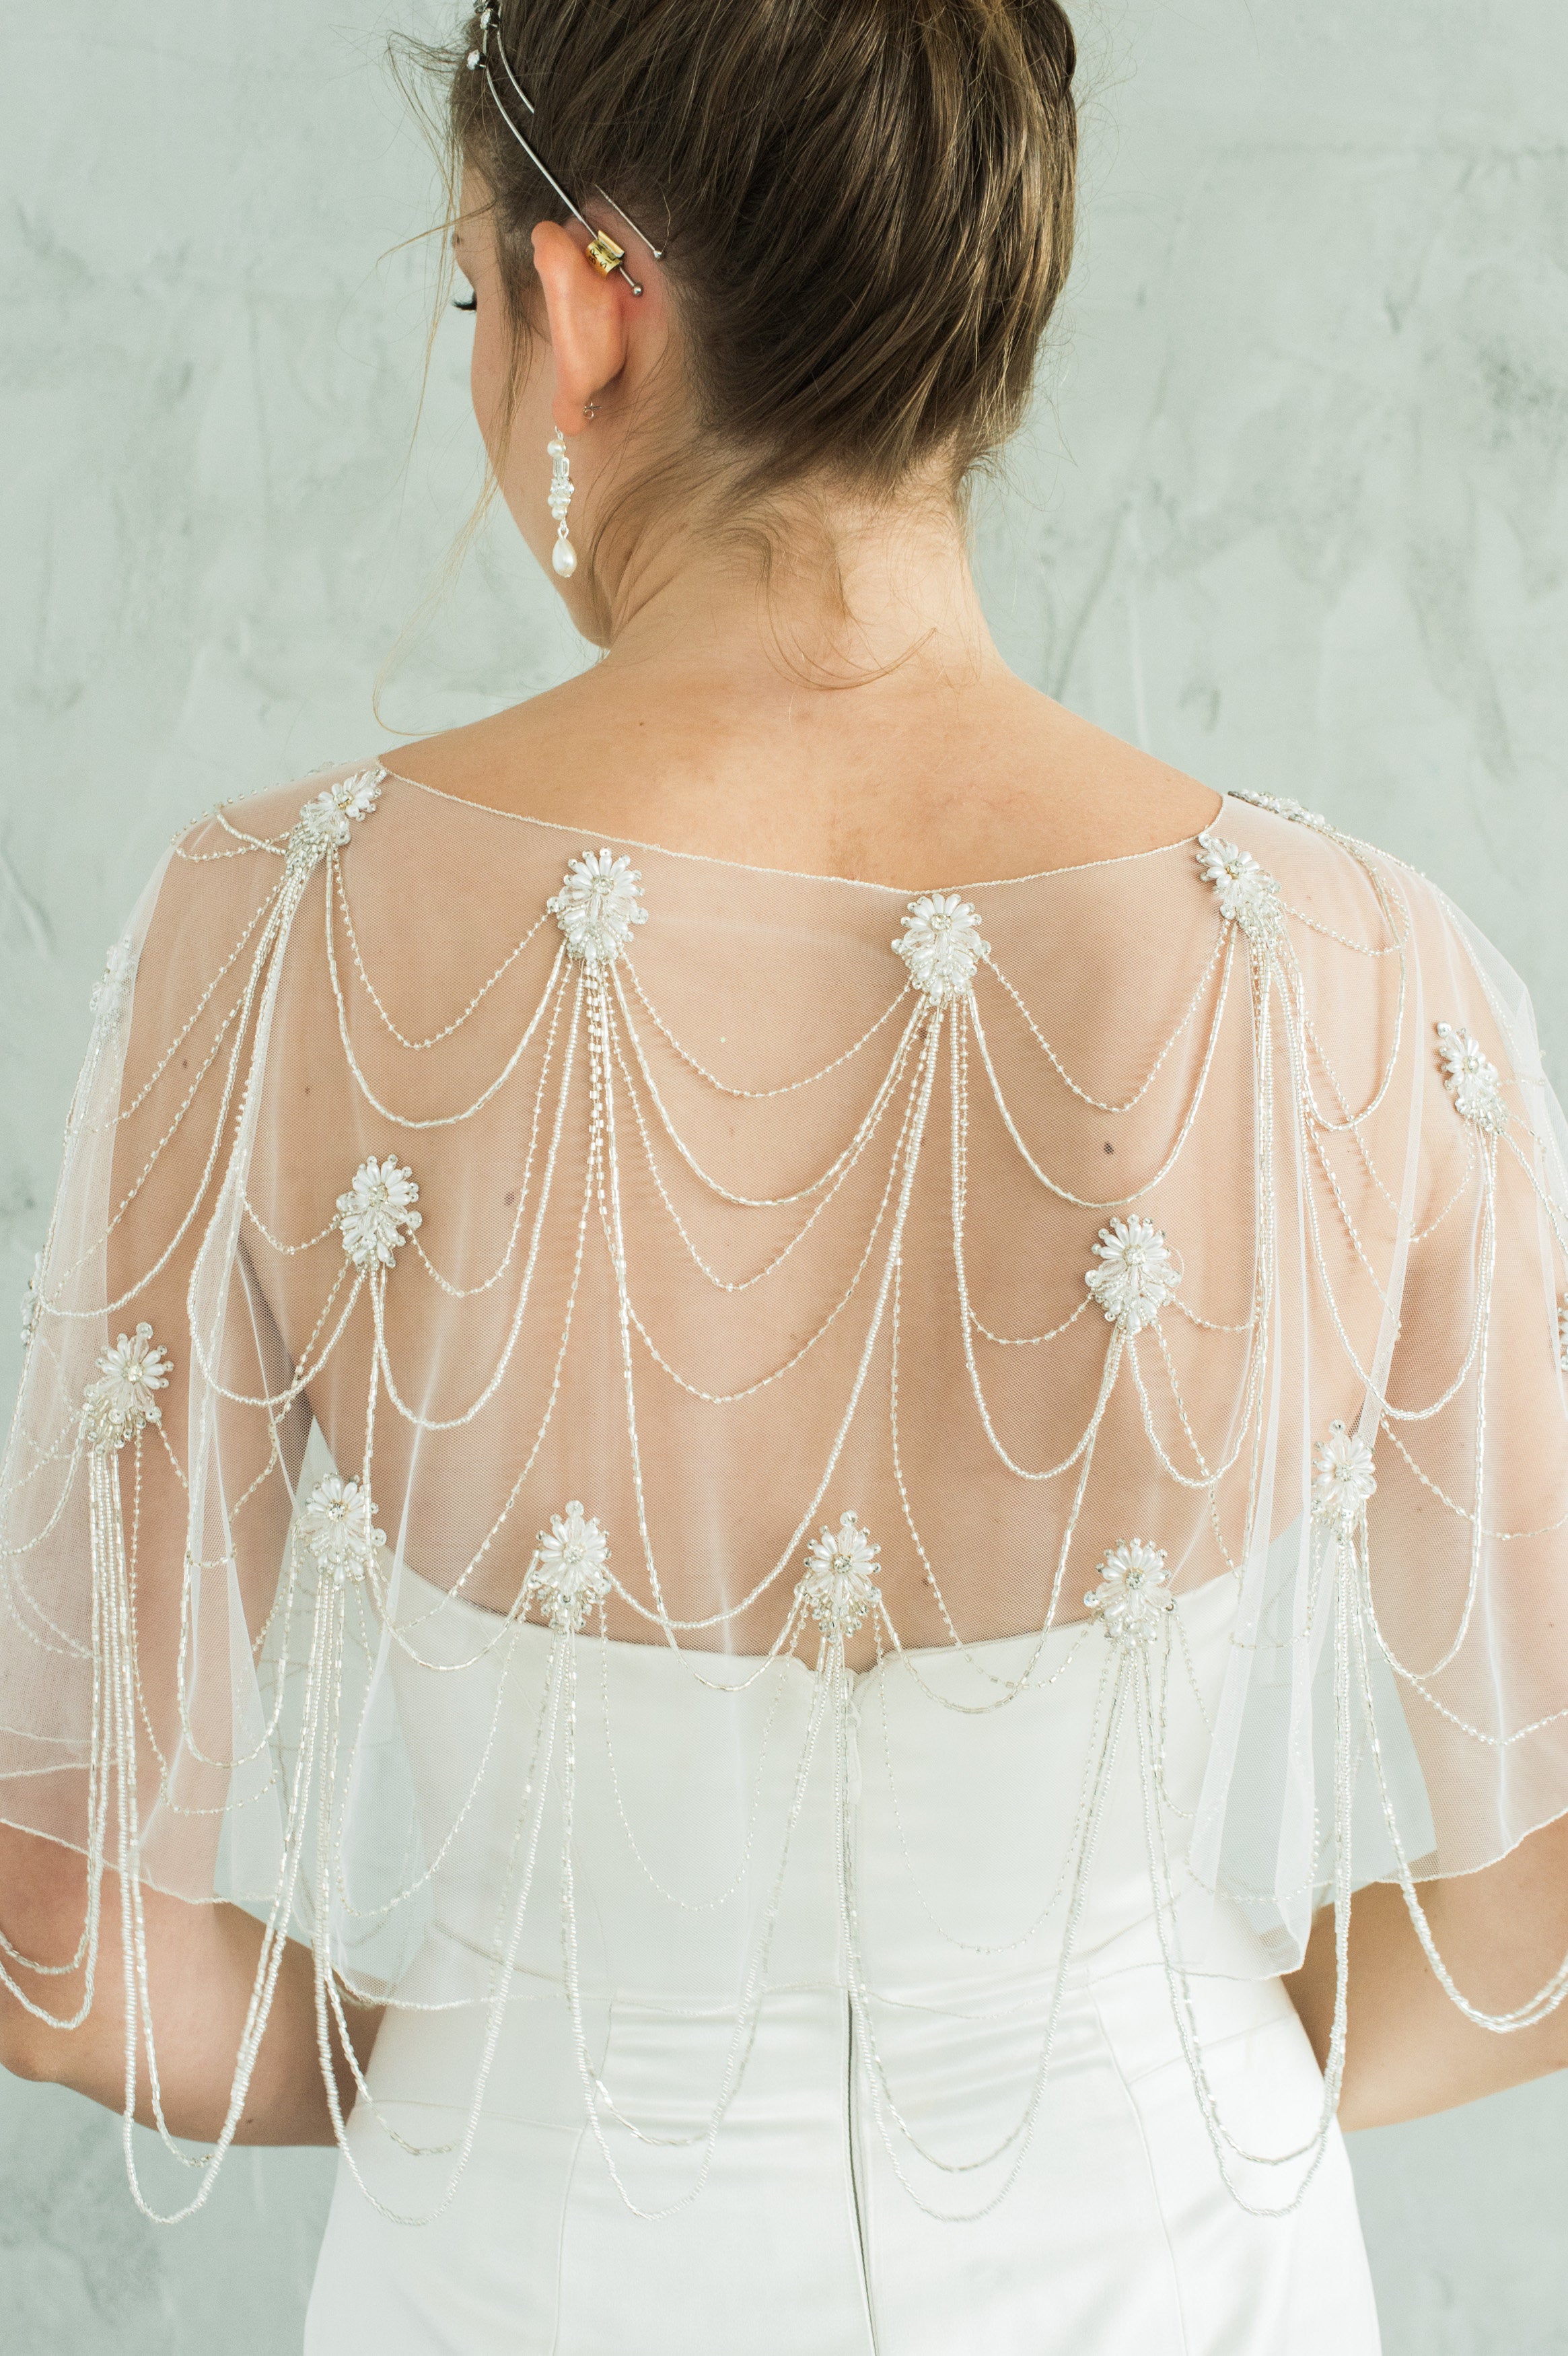 Wraps, Lace Toppers, and Cover-ups for the Bride